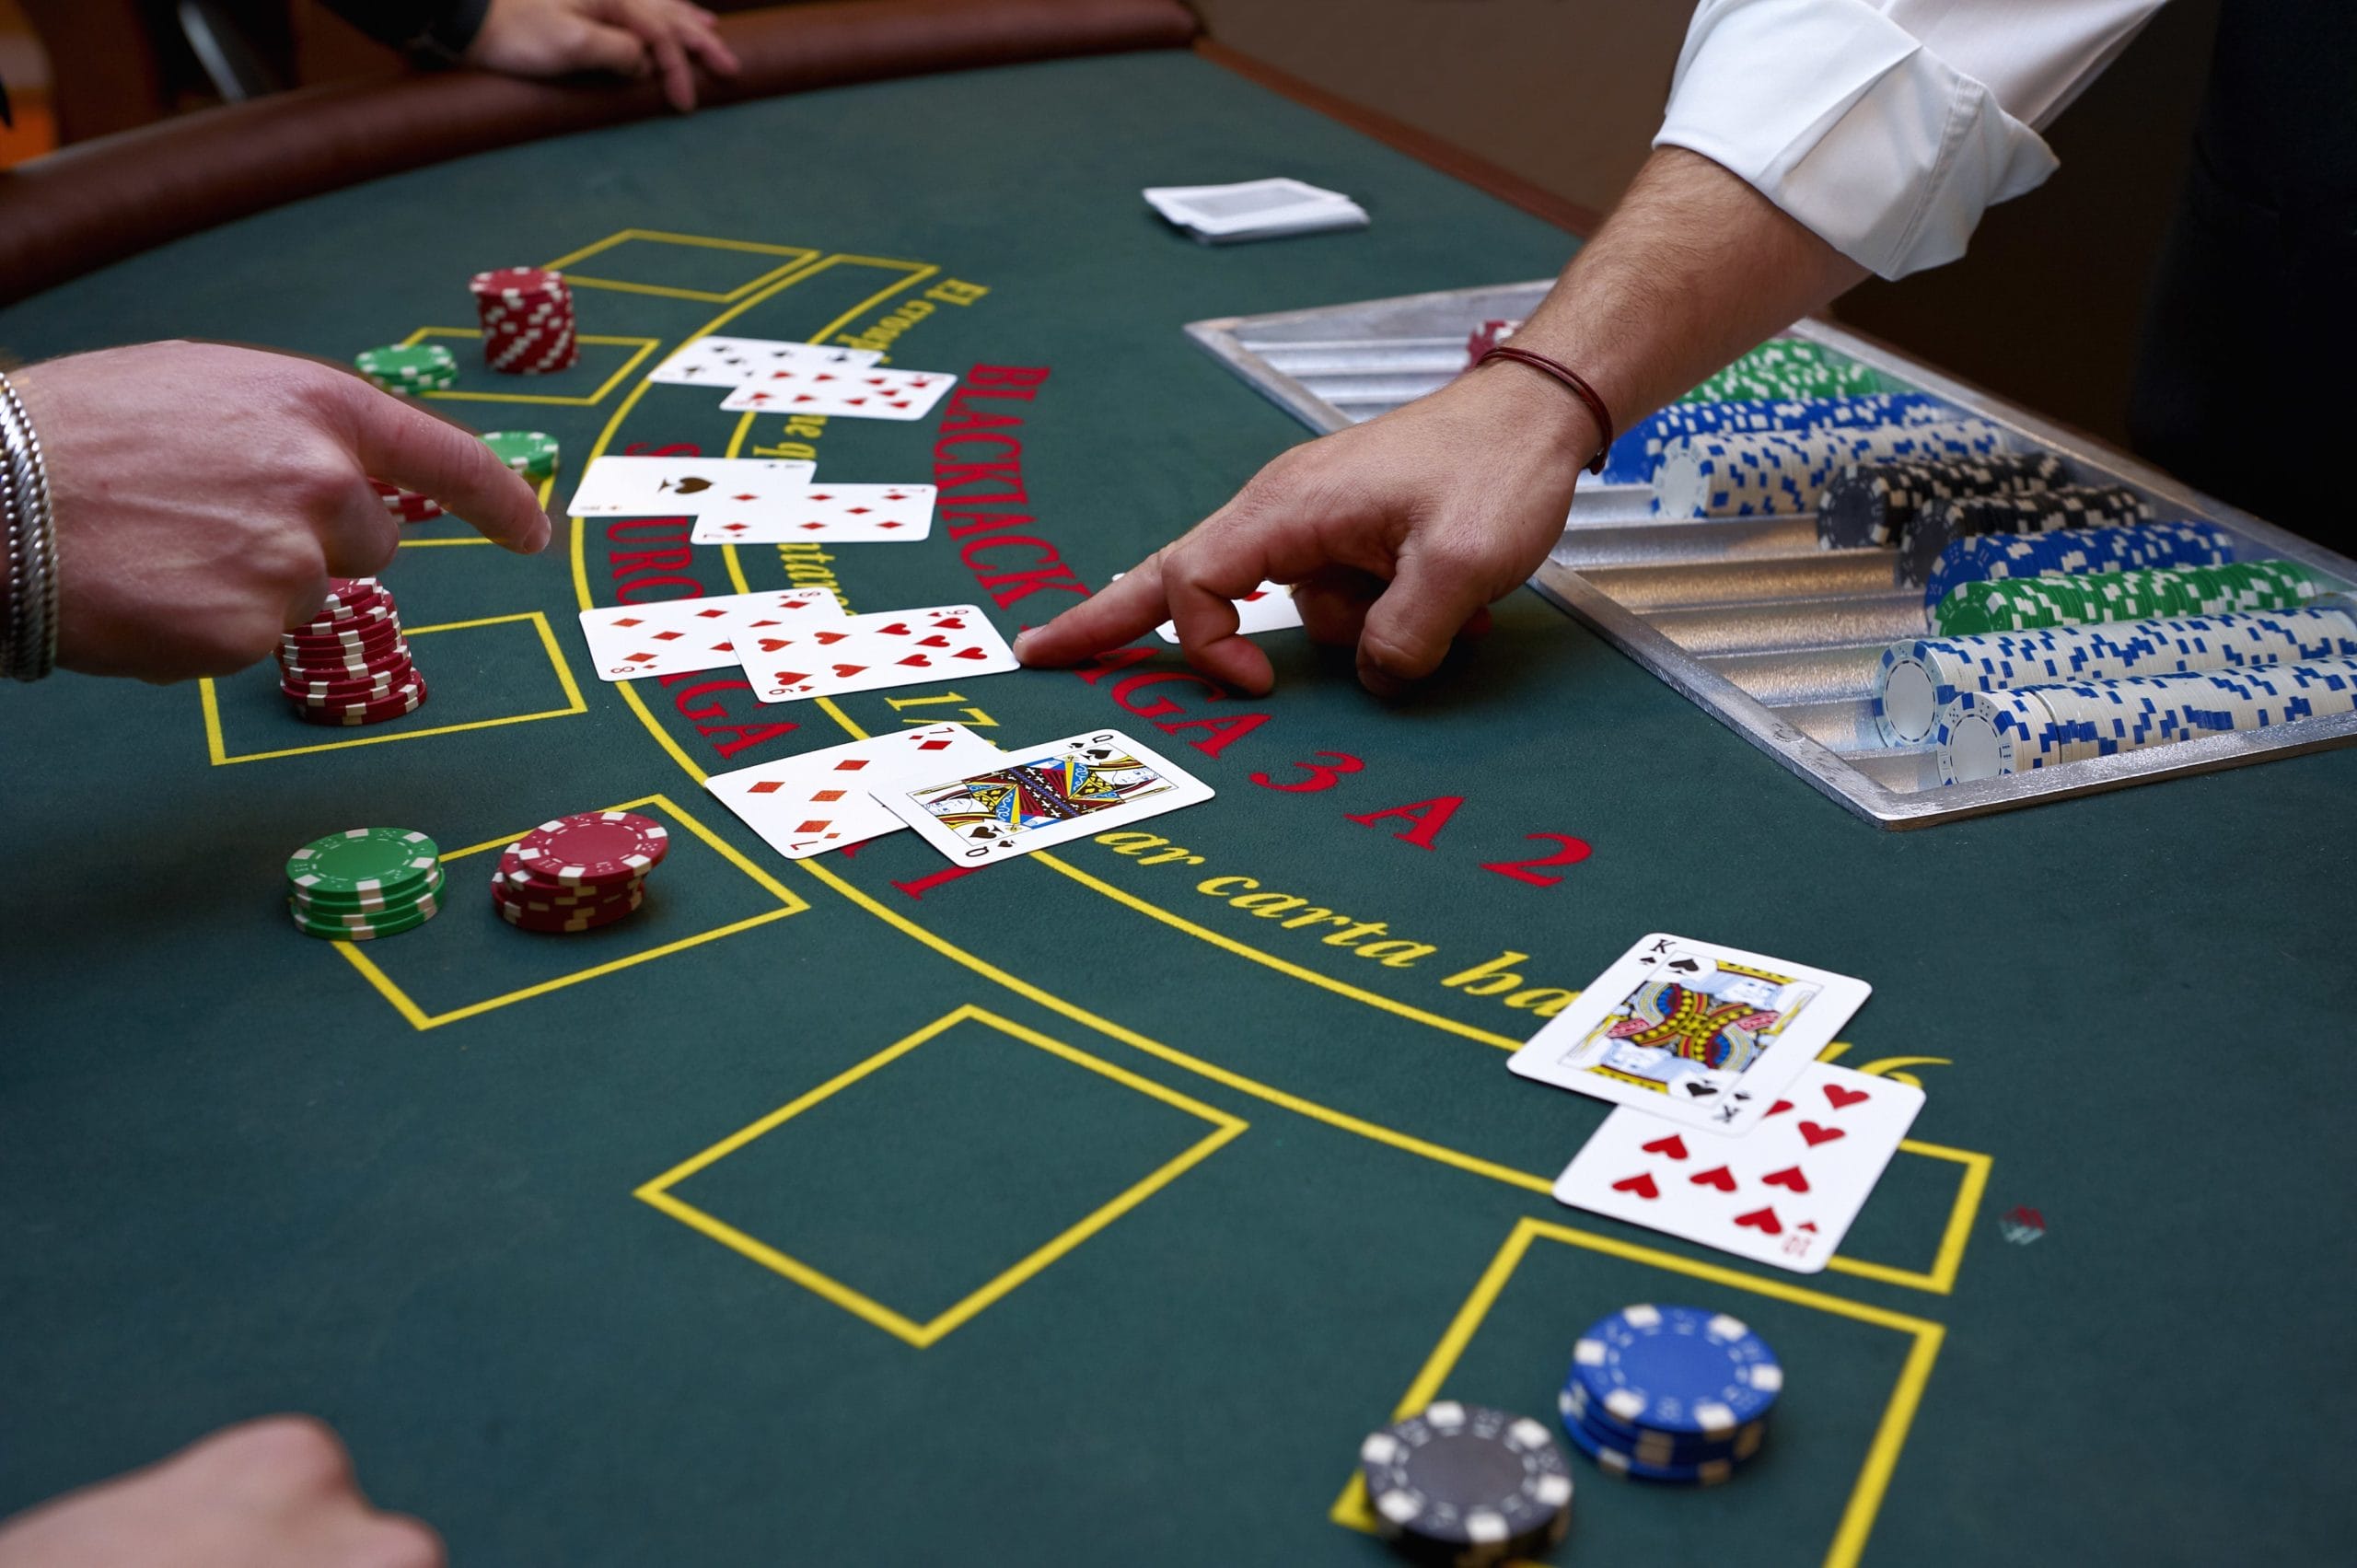 blackjack dealer and player pointing at card on blackjack table with chips